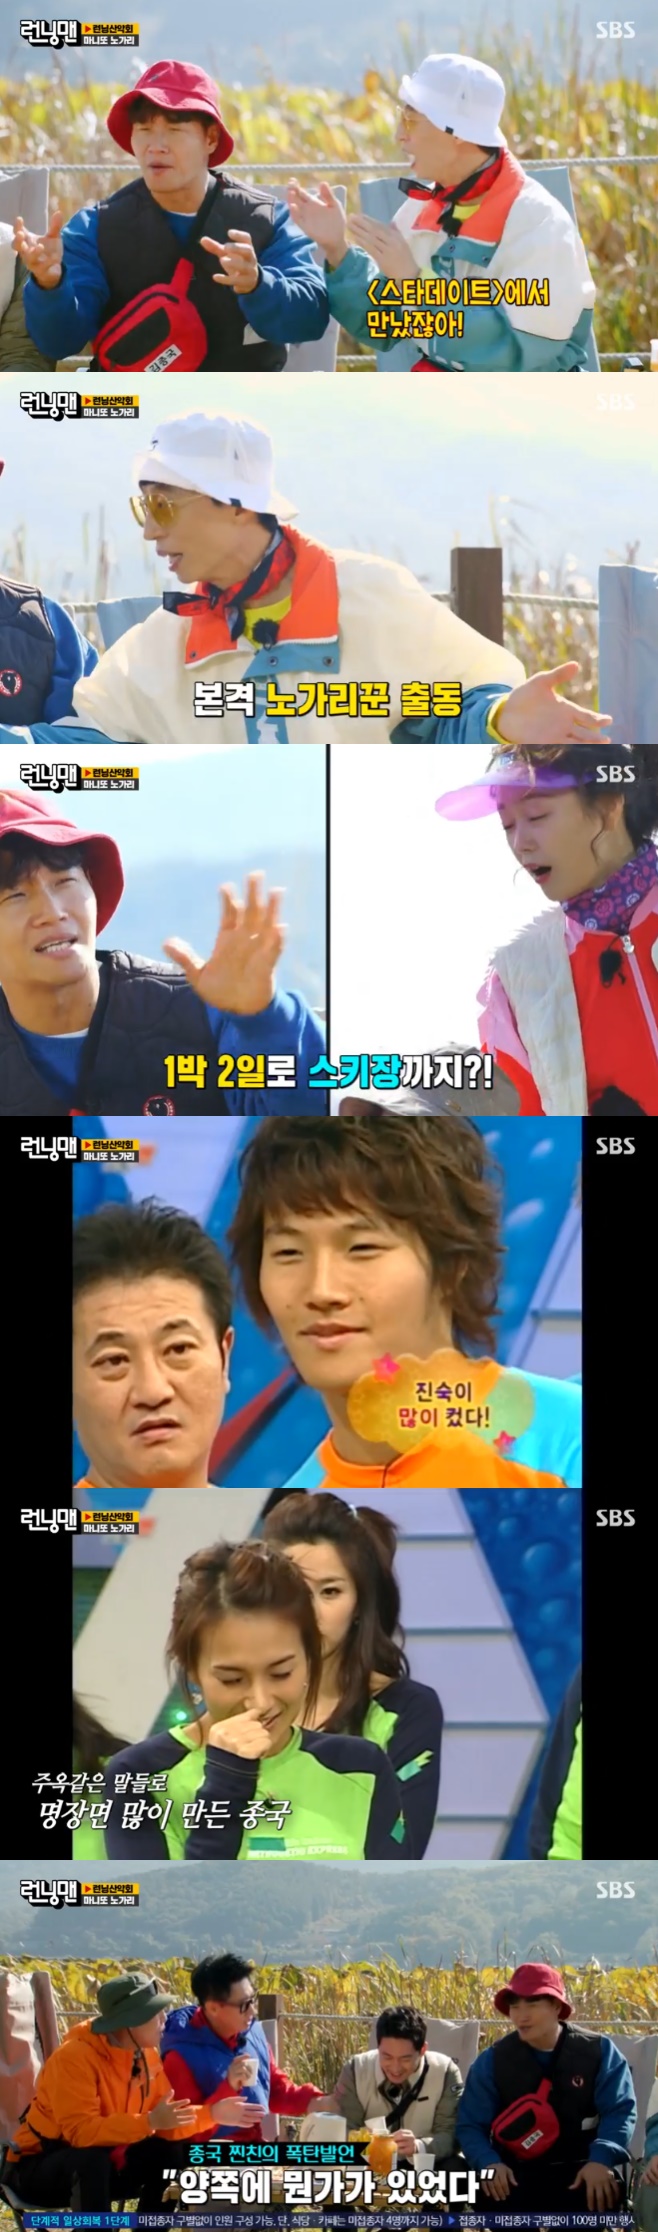 In Running Man, Jang Hyuk caught his eye with meaningful remarks.On the afternoon of the 7th, SBS entertainment program Running Man was depicted as members of the running mountain club Race.On this day, the members hosted the Memories We Gonbe Alright corner, which had a big topic in the past.I could have reacted to Manitos words to make a tee, but if I can not find my Manito, I will be deducted with my partner.We Gon Be Right Corner, Yoo Jae-Suk laughed at Kim Jong-kooks love line story.At this time, Ji Suk-jin said, Chae Yeon has a word that you liked. Kim Jong-kook was embarrassed and explained, Jin Sook met as a fan and entertainer in his days.There was a Star Date program that I spent two days with, and Chae Yeon appeared as a fan before his debut in the entertainment industry.But later I met again at X-Men. Finally, I said, How are you, Jin-Sook?, and when Ji Suk-jin asked, So was it a triangle with (Yoon Eun-hye)? Jang Hyuk said, It was not a triangle, but there was something on both sides.I need to think about this girl drinking water like this. I am nervous. 